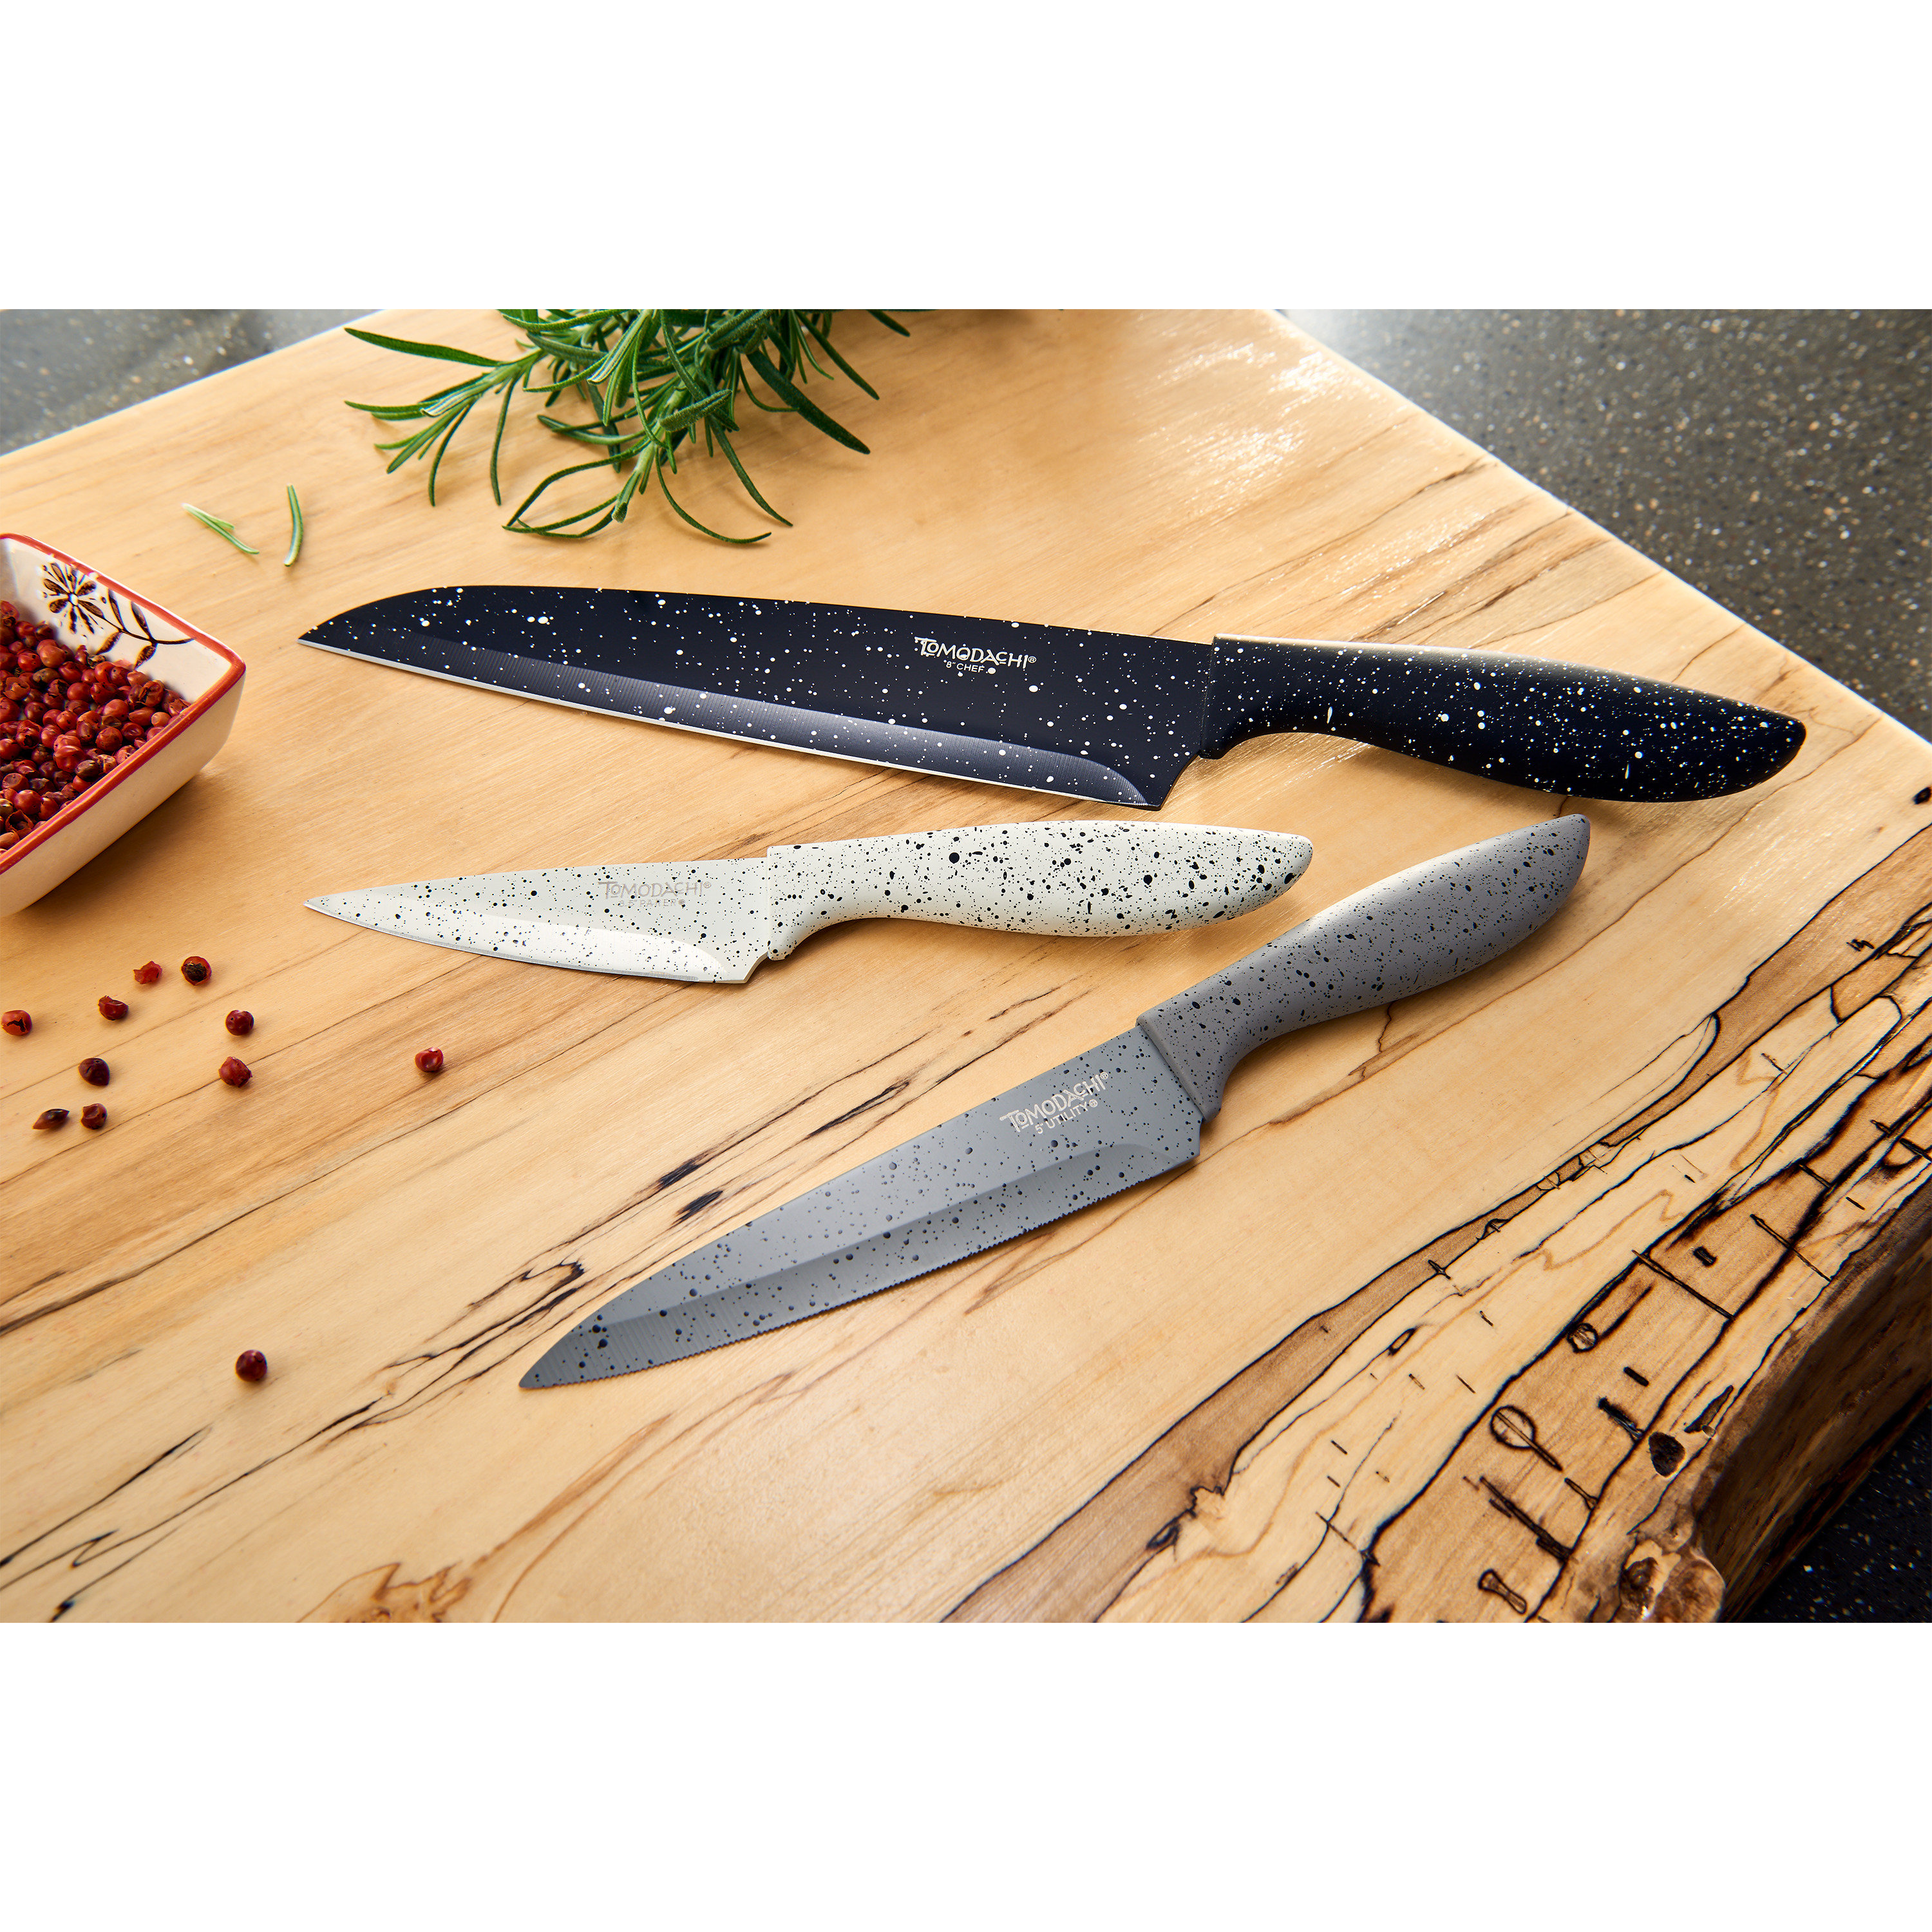 Tomodachi 3 Piece Pairing Knife Set With Printed Blades - Lot Of 2